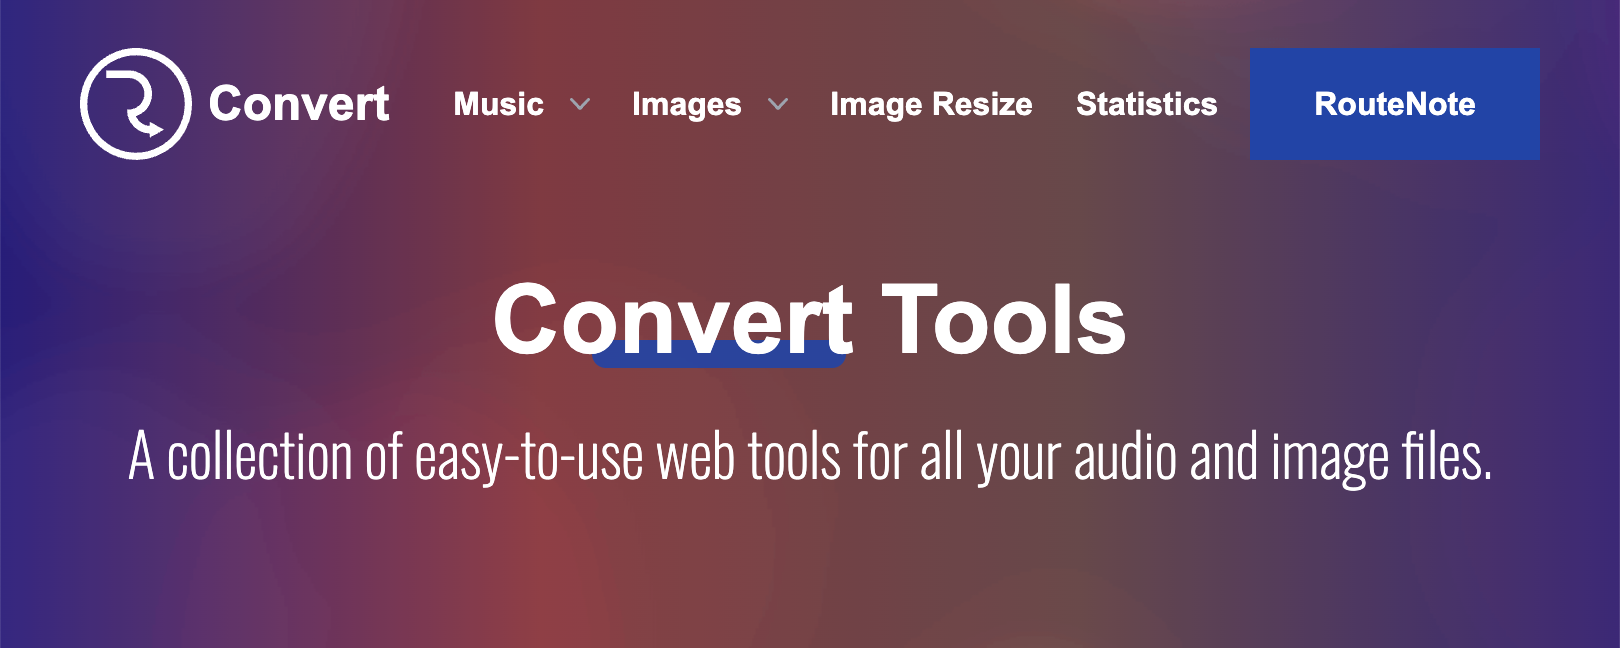 RouteNote Convert – convert and resize images online for free